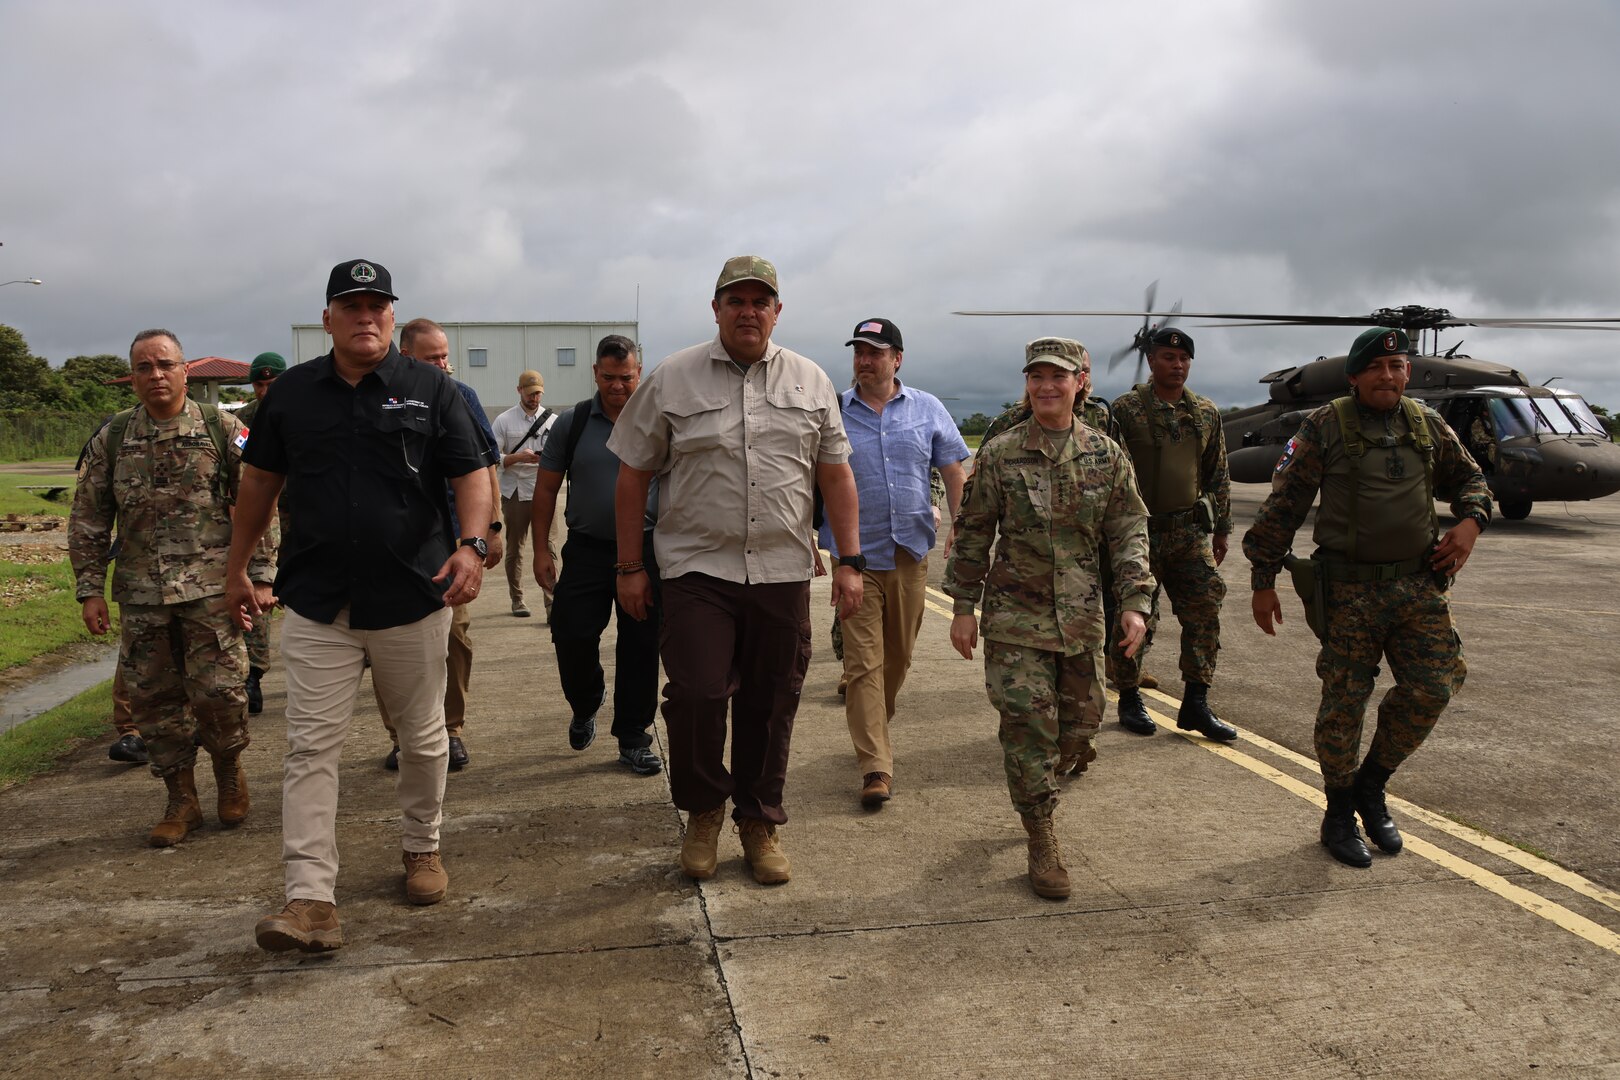 The commander of U.S. Southern Command, U.S. Army Gen. Laura Richardson, accompanies Panama’s Minister of Public Security Juan Pino to visit with Panamanian security forces operating in the Darién Gap.